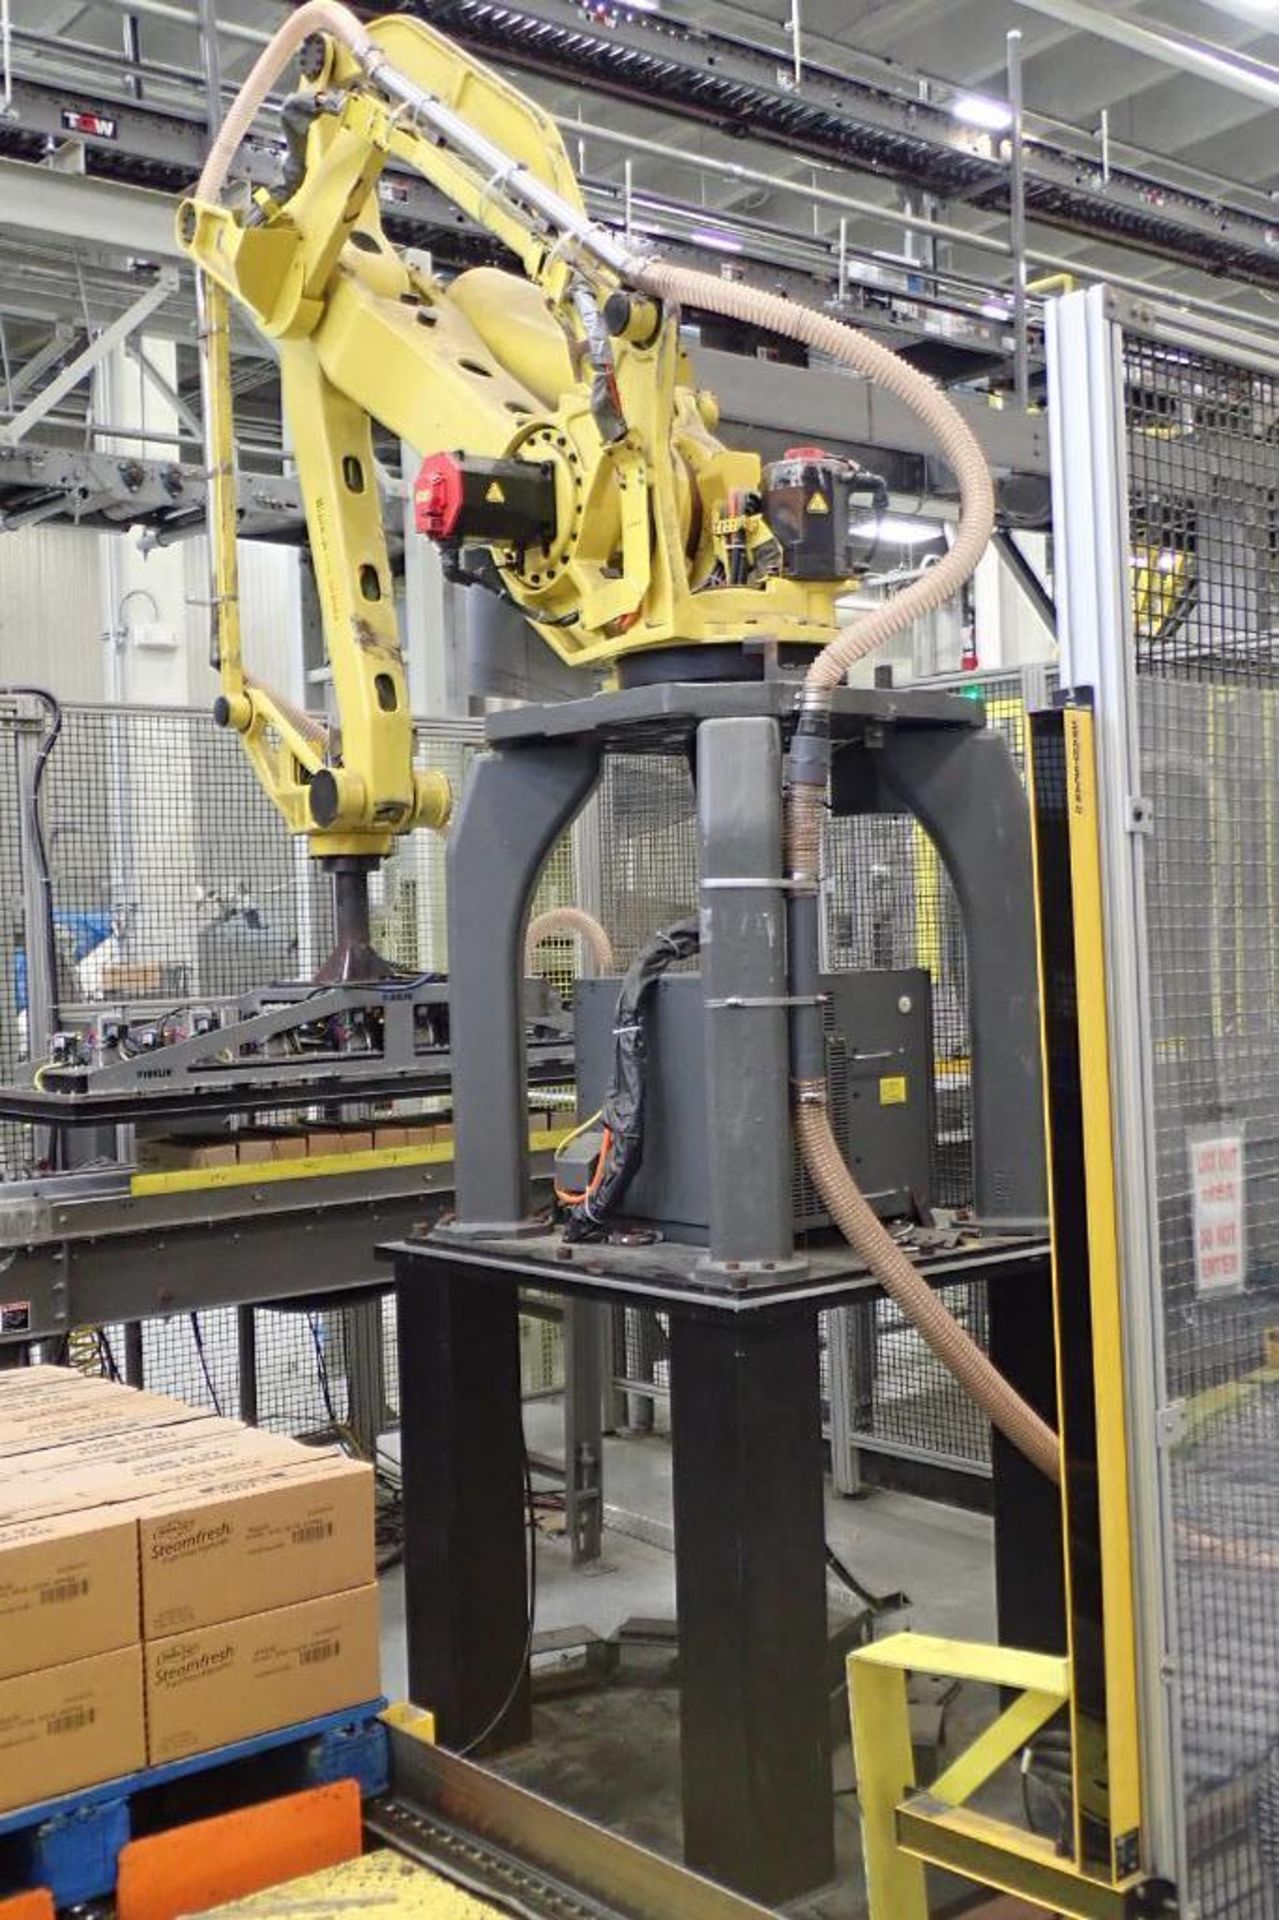 Fanuc palletizing robot model M-410-iB16 with controller and pendant - Image 5 of 12